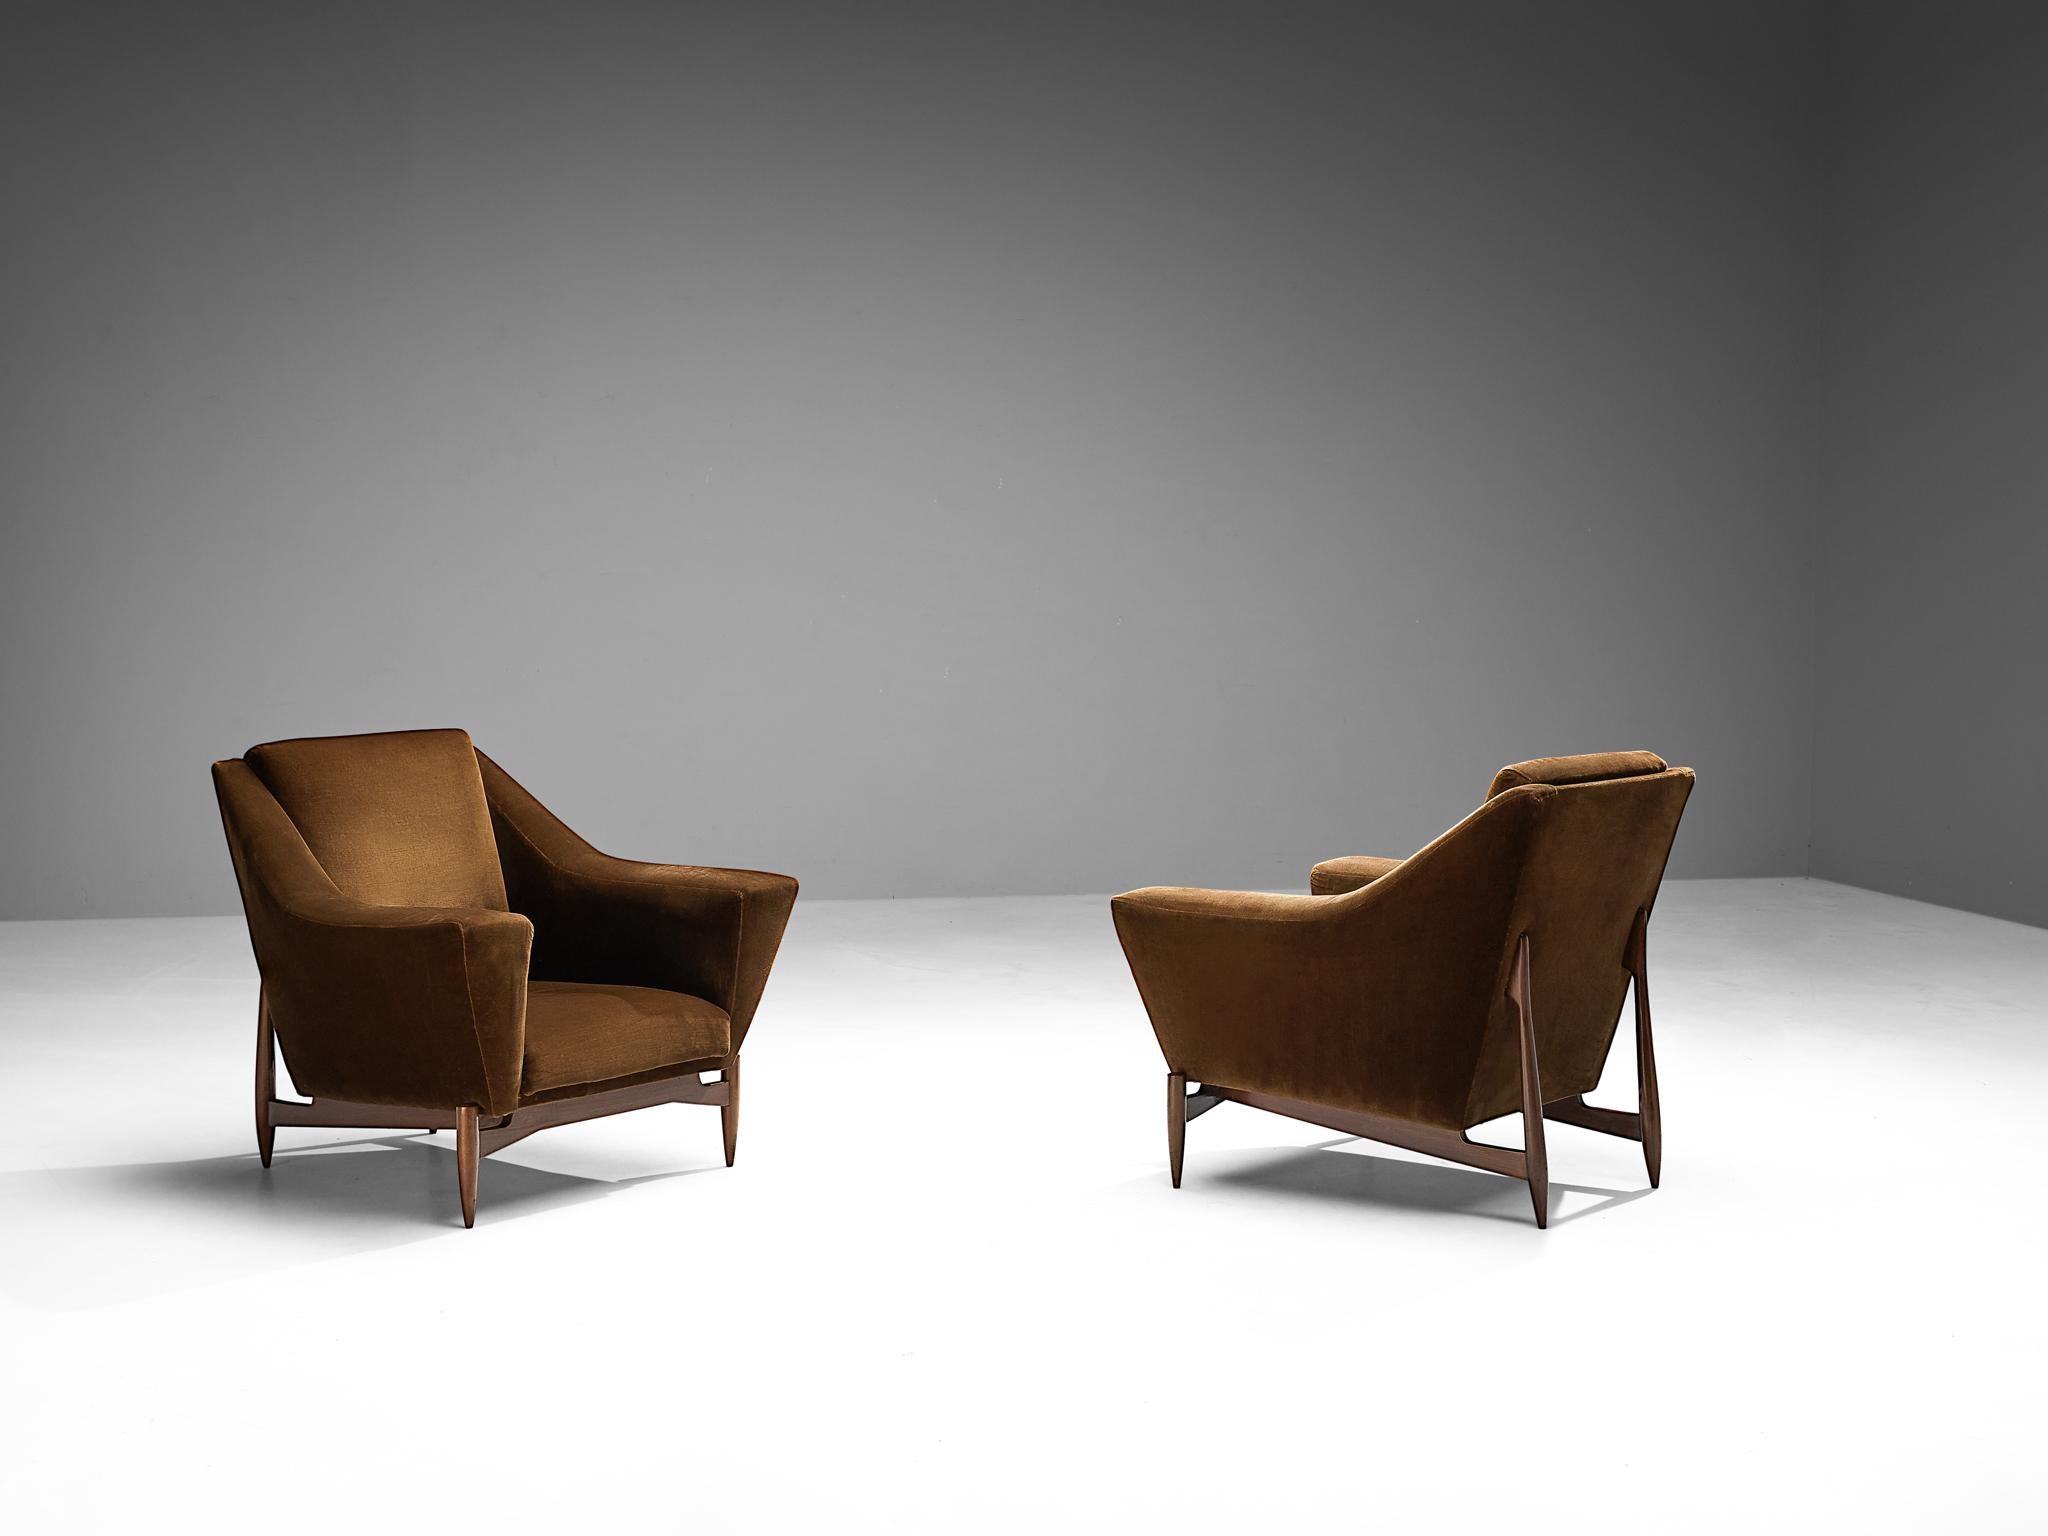 Pair of lounge chairs, brown velvet, stained beech, Italy, 1950s.

An extremely elegant and flattering pair of armchairs, made in Italy in the 1950s. These lounge chairs instantly reminds of the work of some prominent Italian designers that were